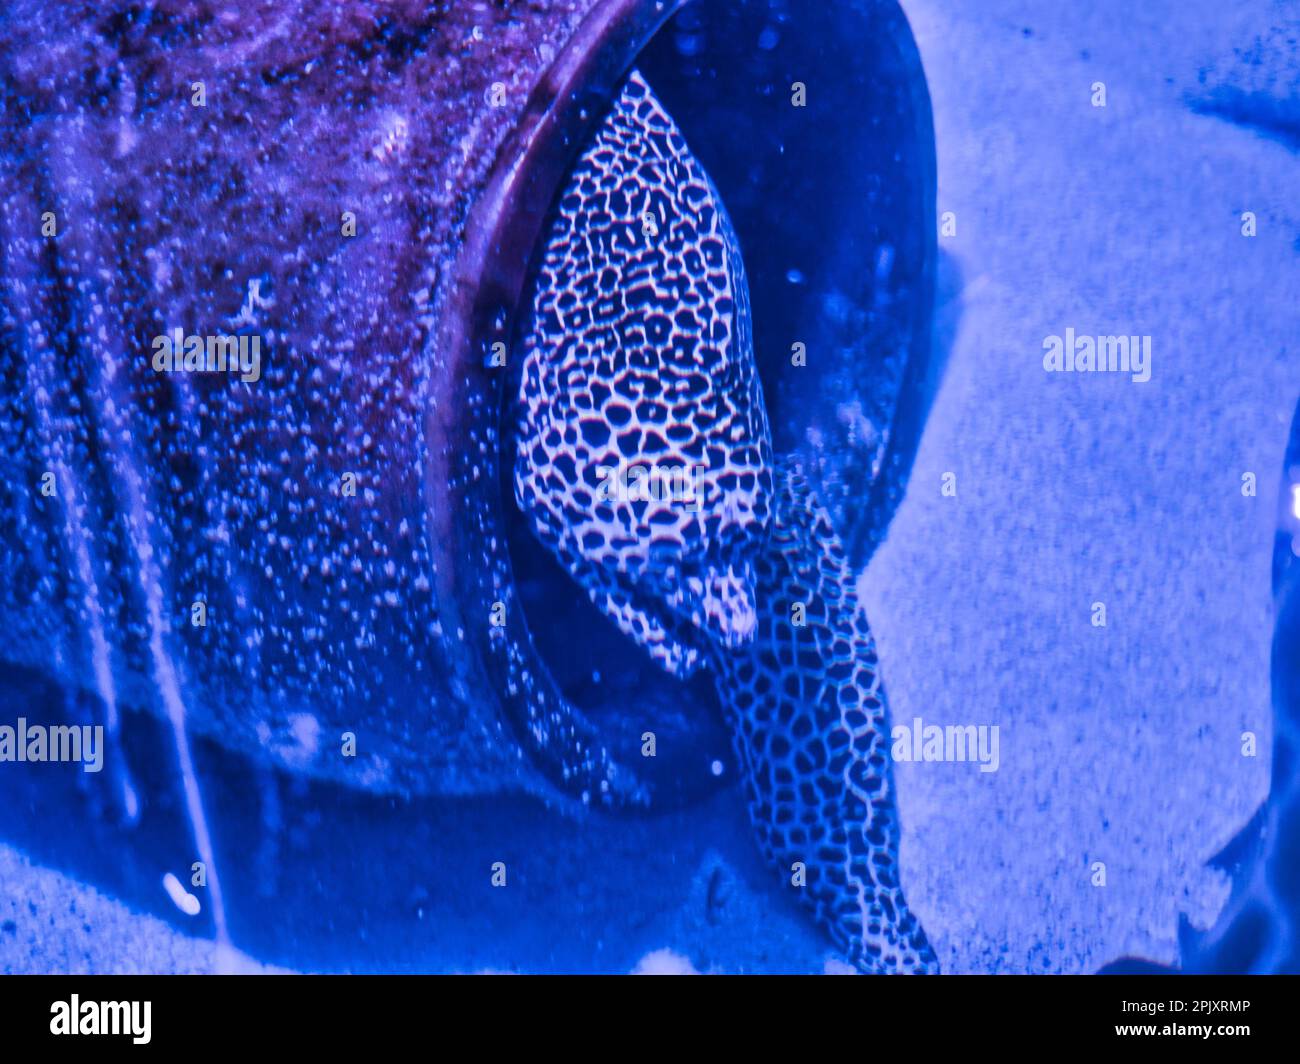 A Moray Eel using stralth to hunt a meal in a small underwater aquarium Stock Photo